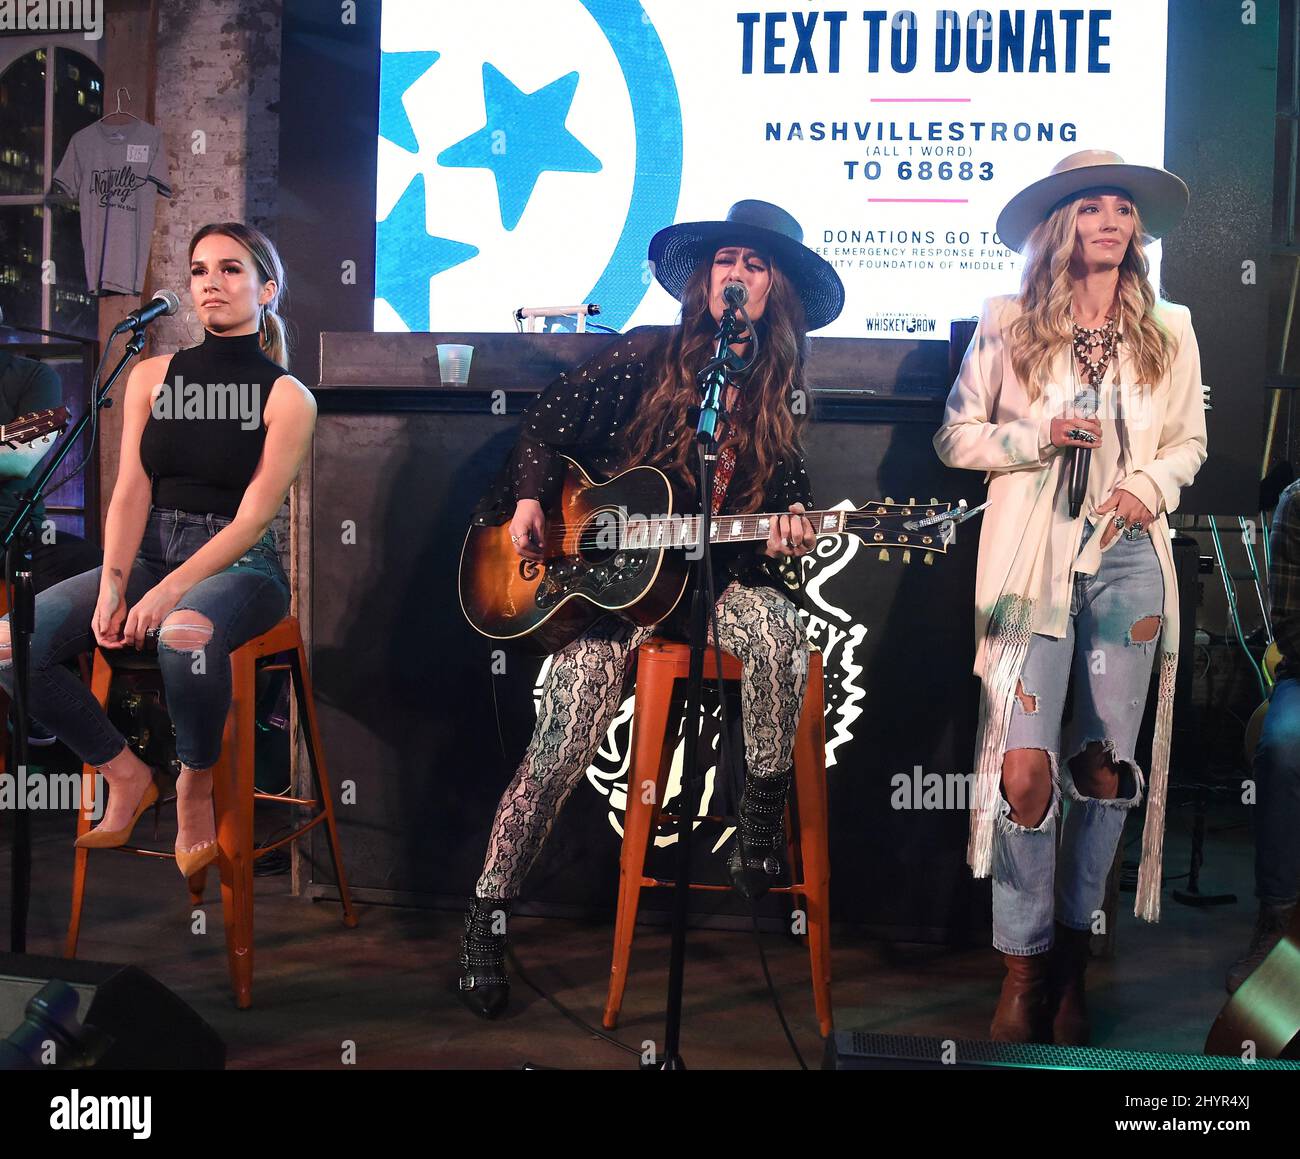 Jessie James Decker and The Sisterhood on stage at the Whiskey Row Tornado Relief Concert Hosted by Mitchell Tenpenny & Friends at Dierks Bentley's Whiskey Row in Nashville, TN. on March 9, 2020 Stock Photo